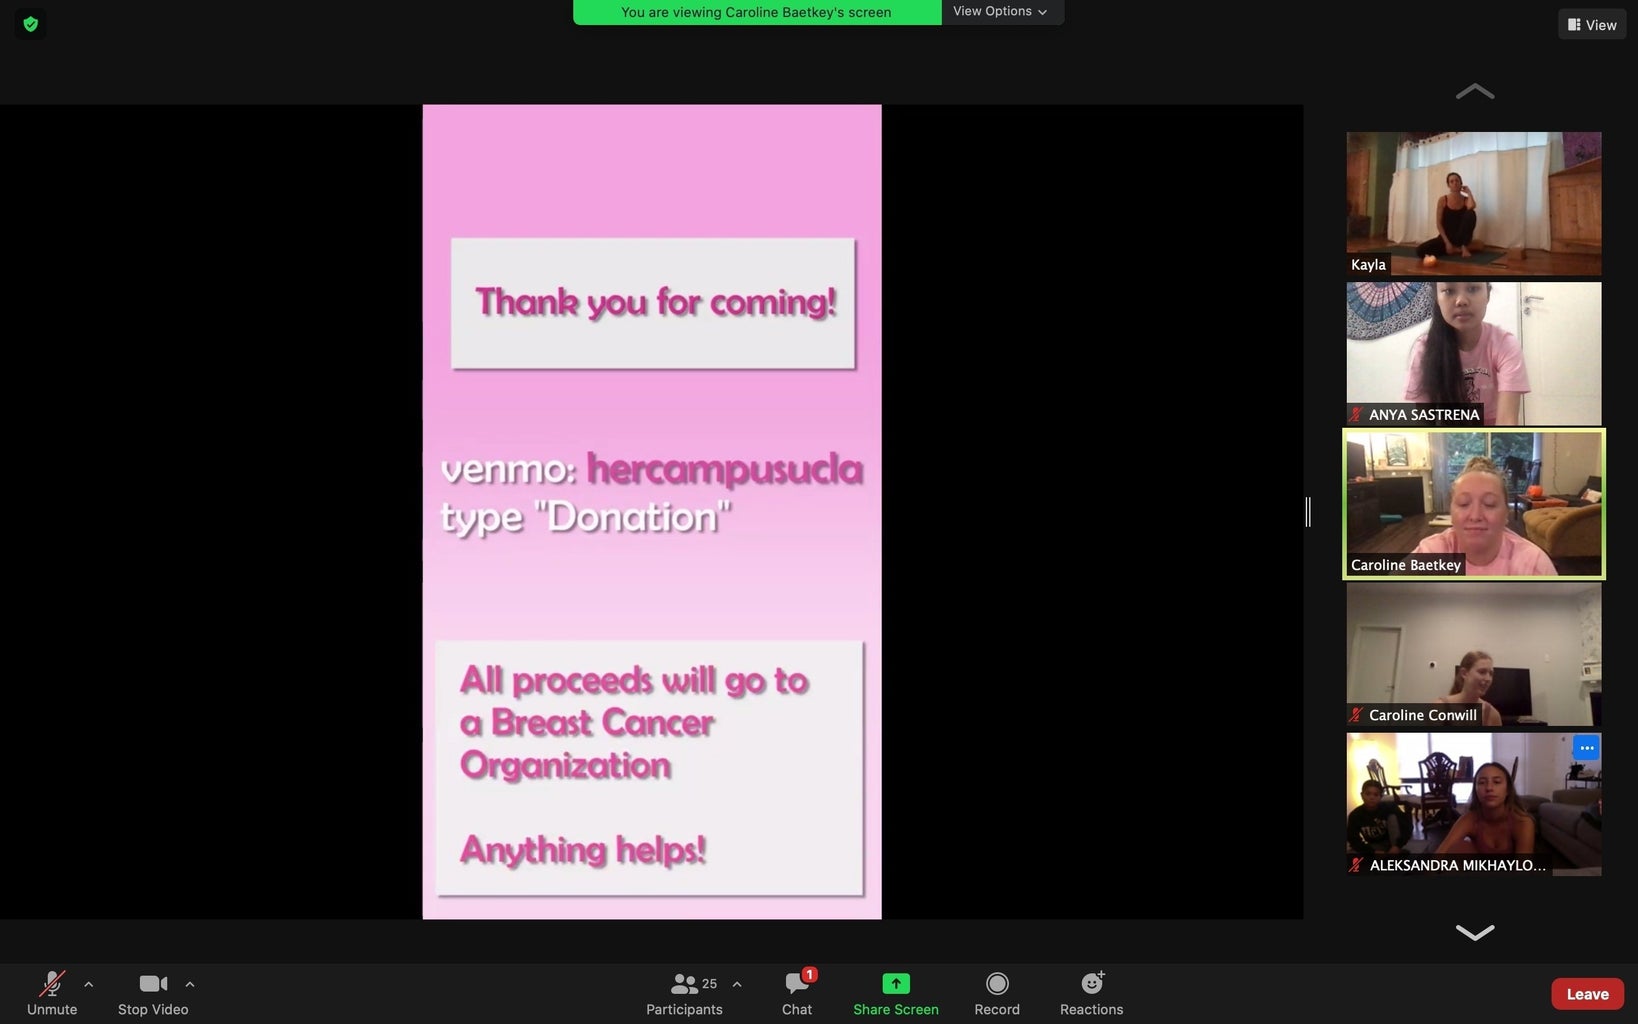 Donation page during zoom call